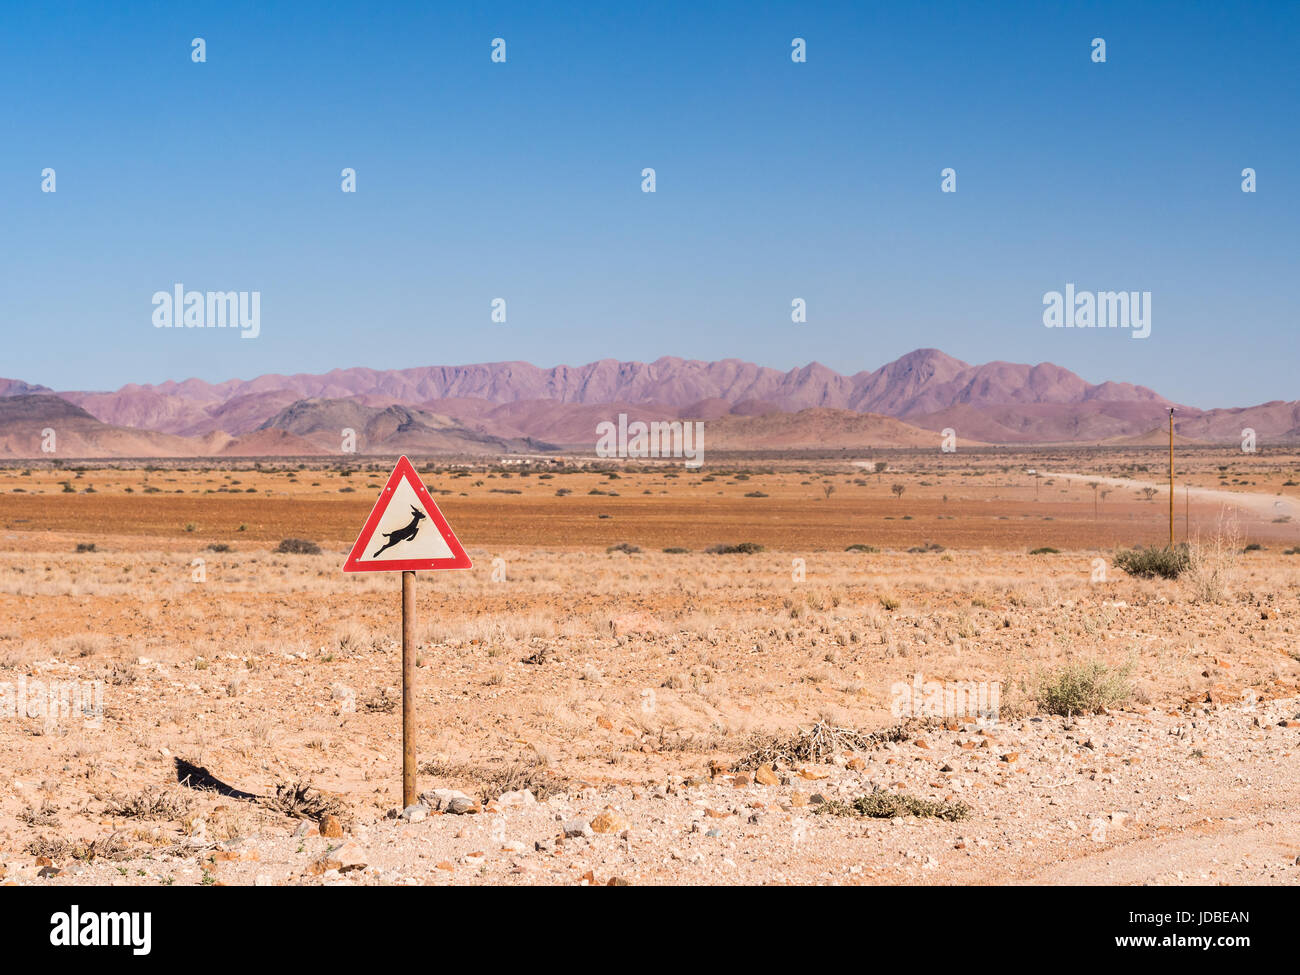 Warning sign with gazelle symbol on the road to Solitaire on the Namib desert, Namibia, Africa. Stock Photo